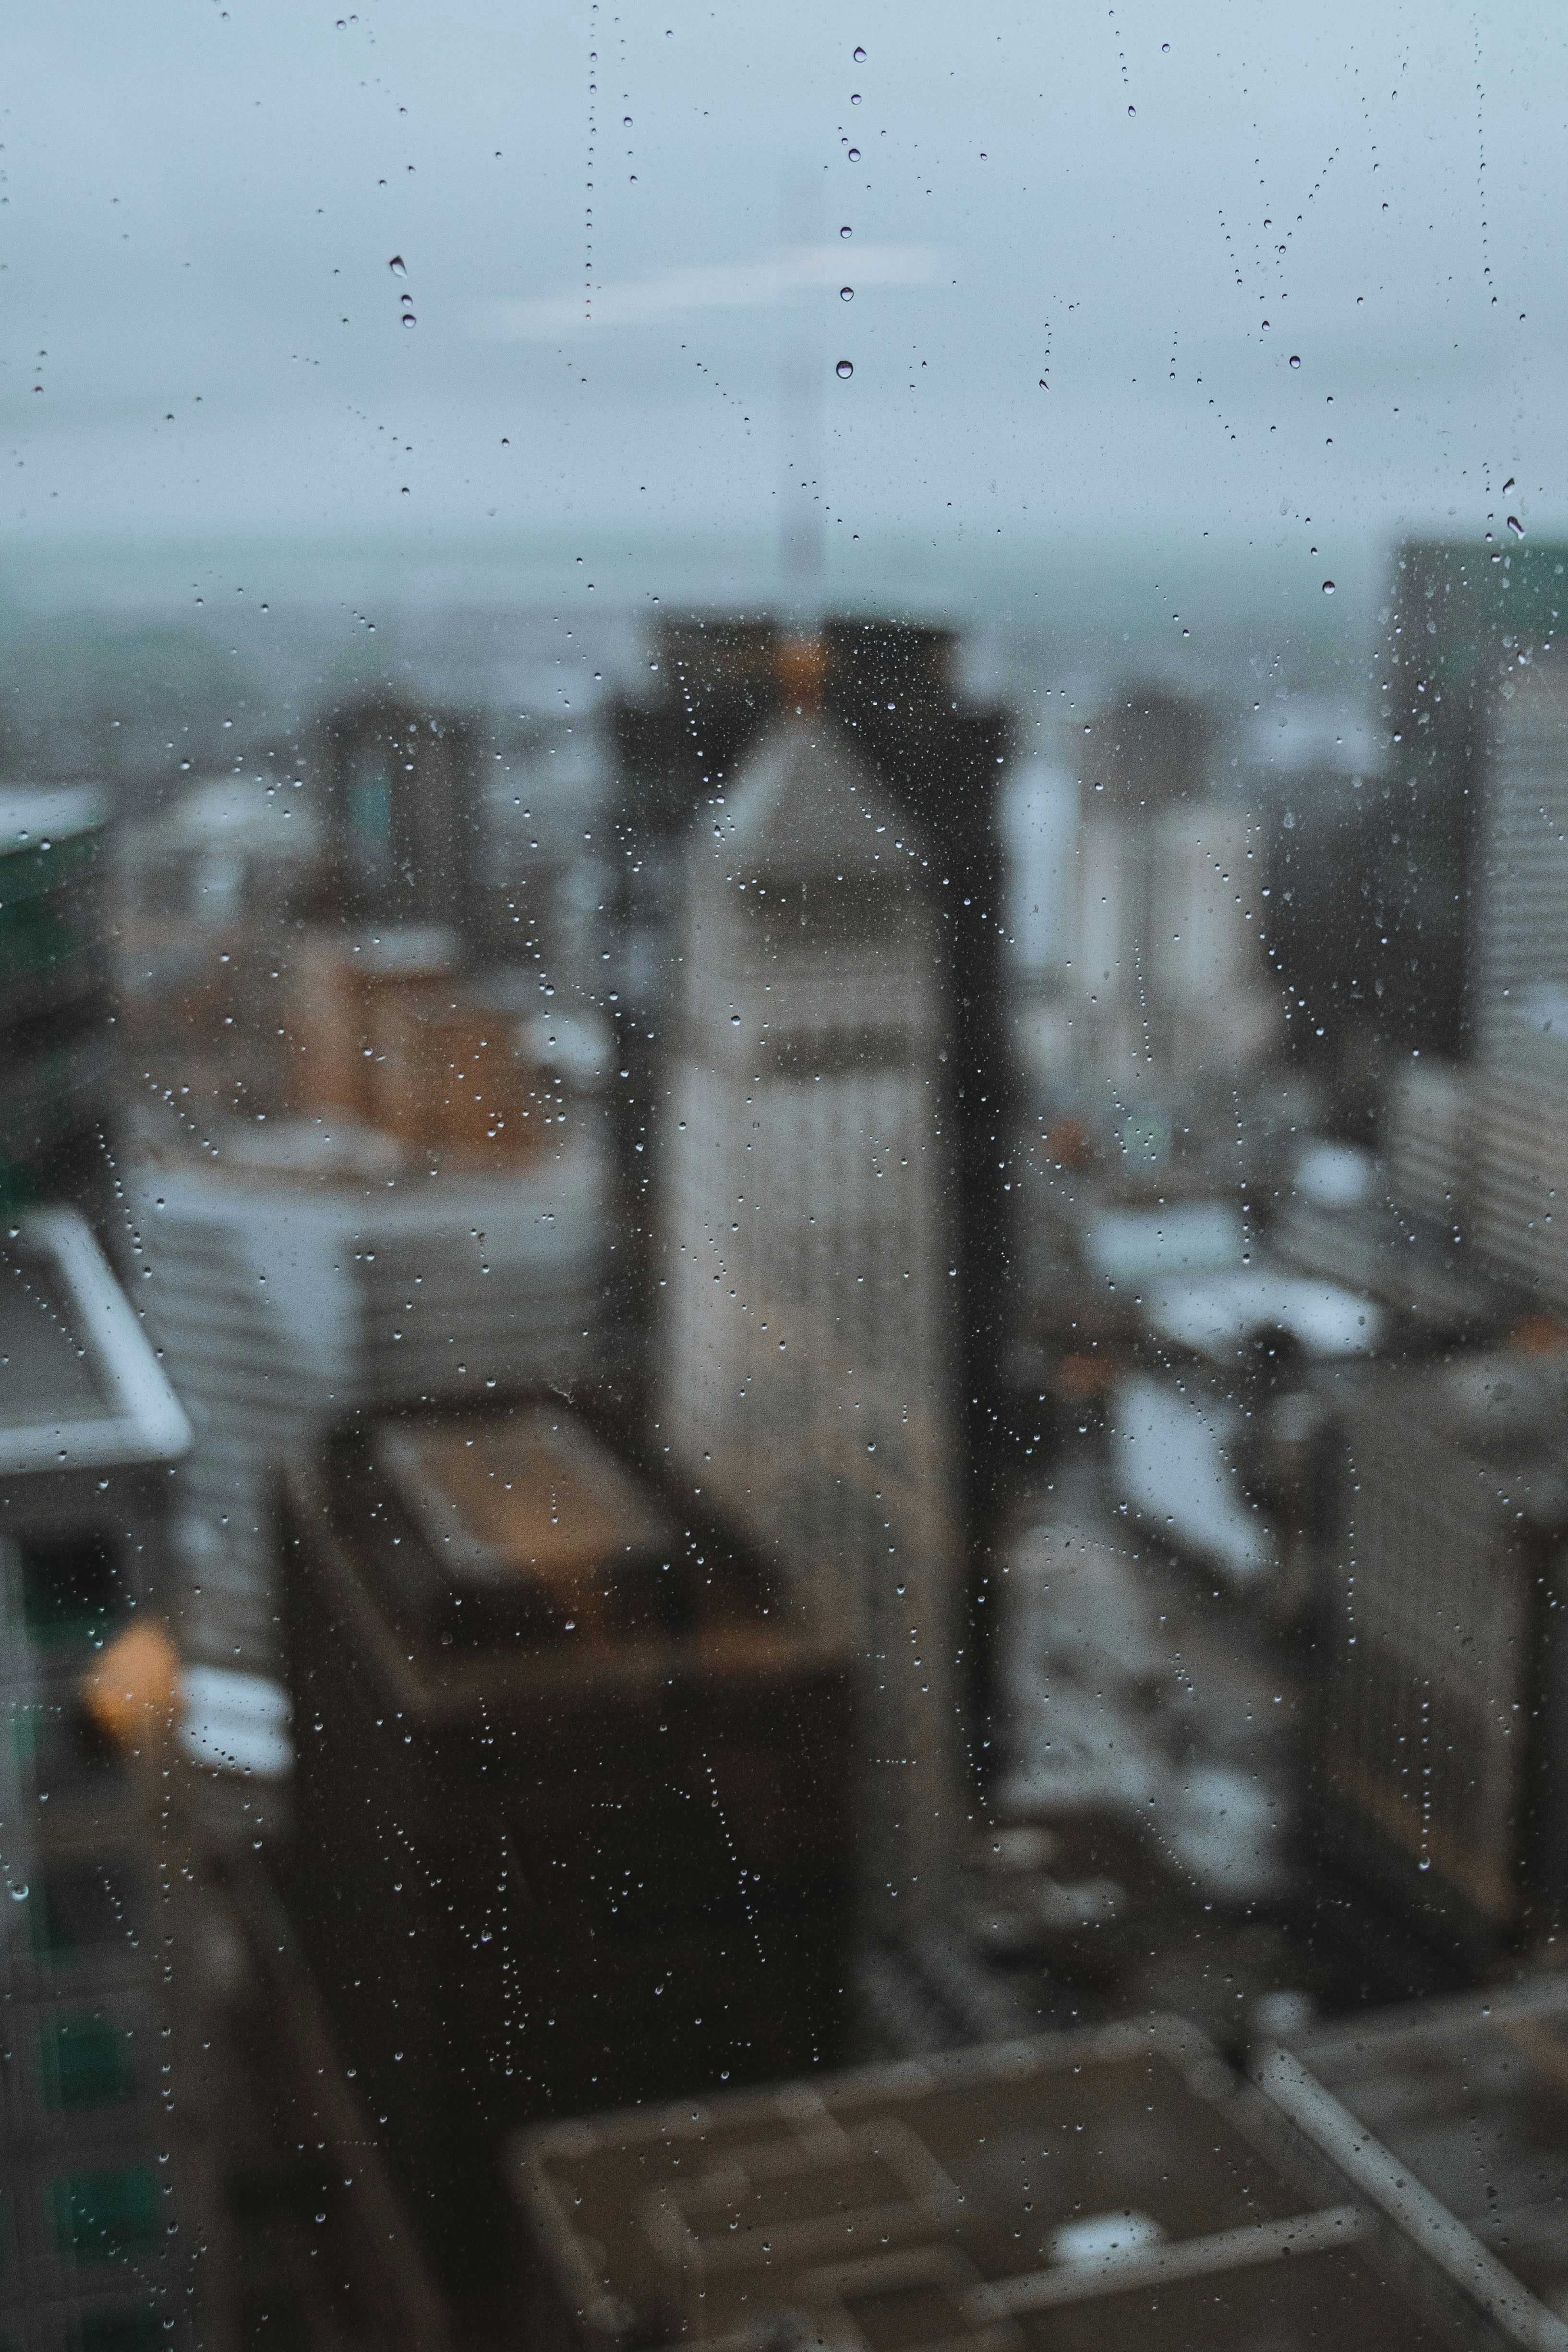 Rain falling down window with city in background @nalty_photography on Instagram